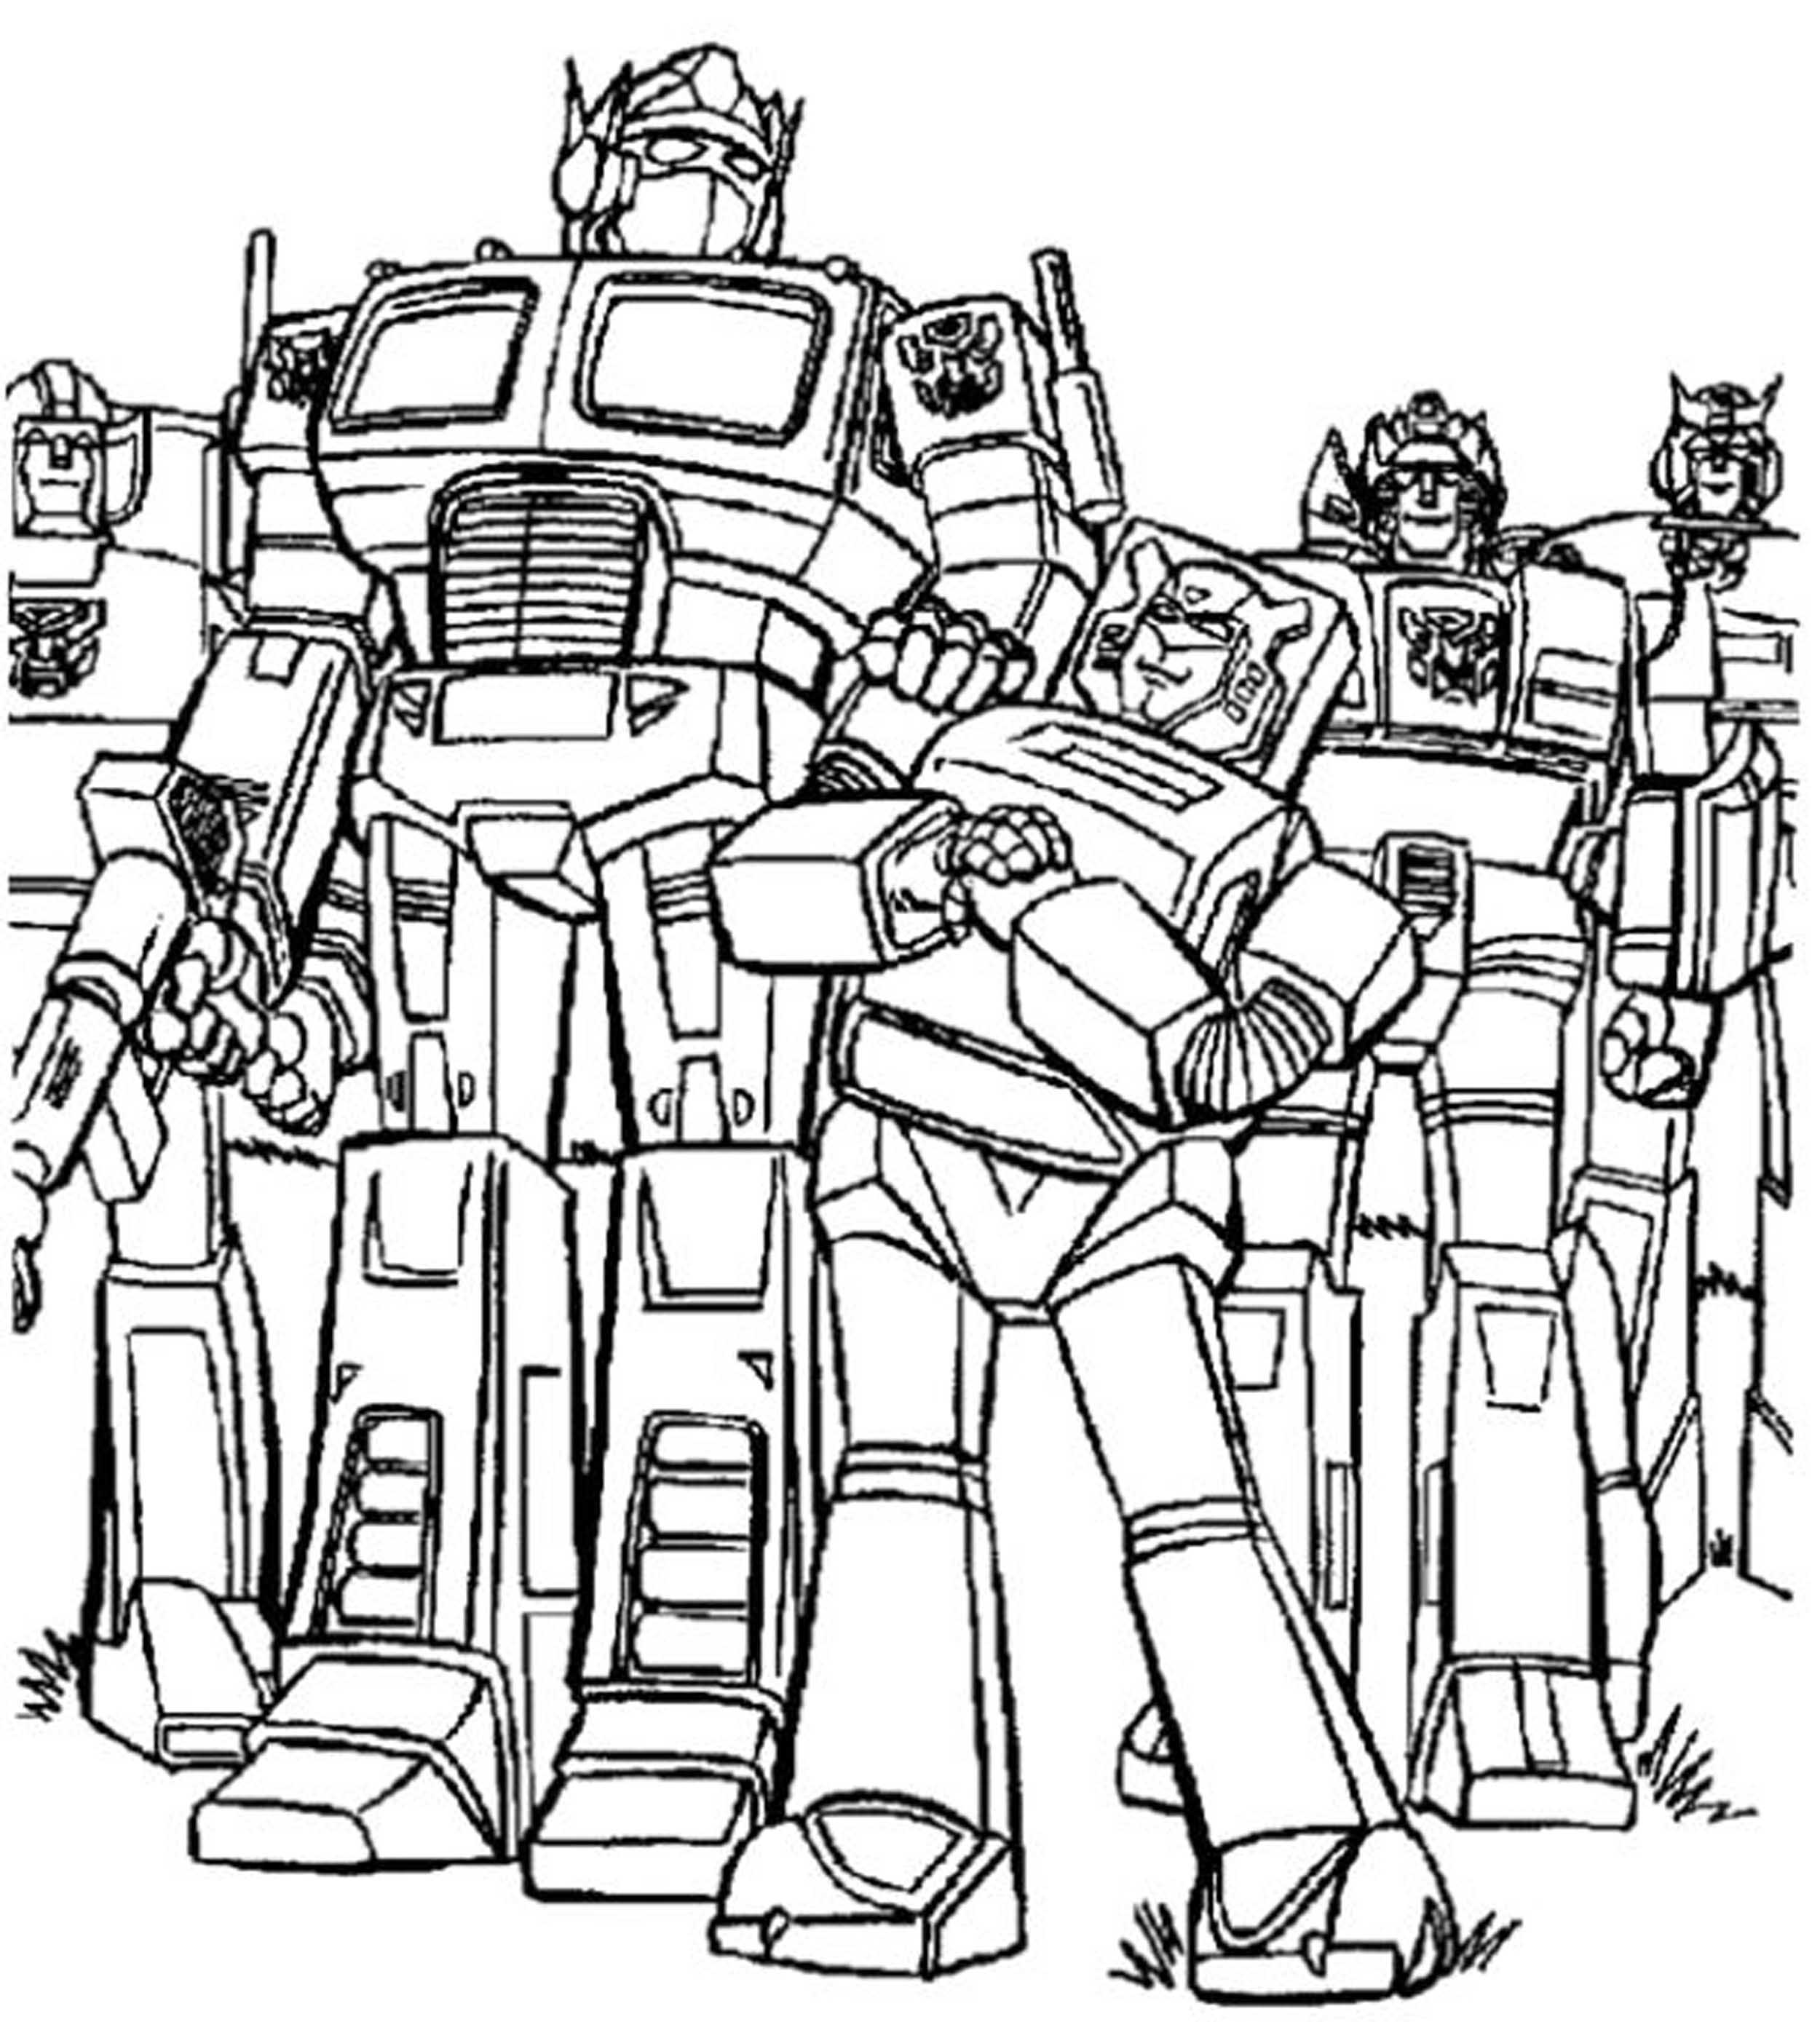 Download Print & Download - Inviting Kids to Do the Transformers Coloring Pages